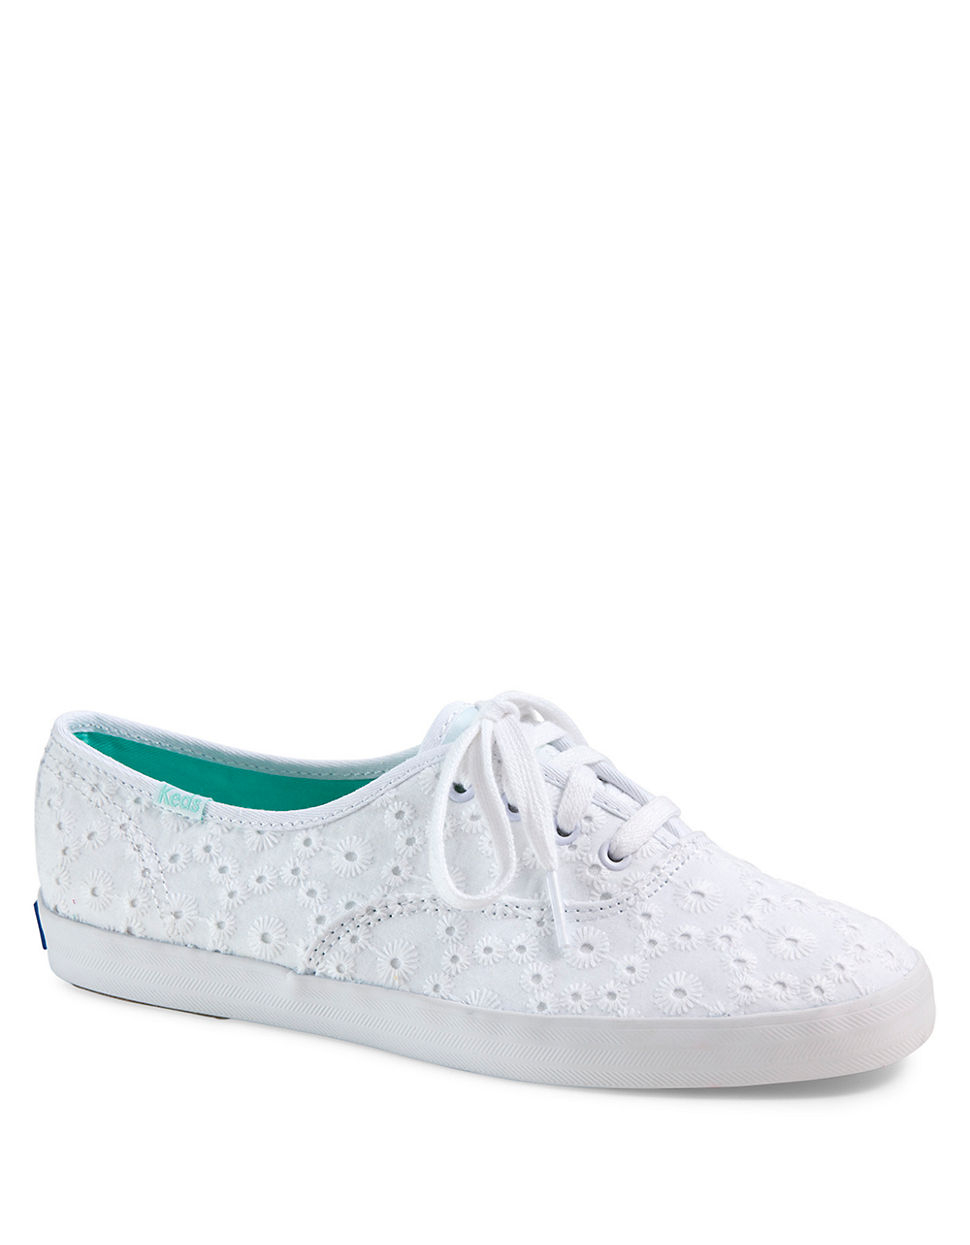 Keds Champ Eyelet Sneakers in White | Lyst